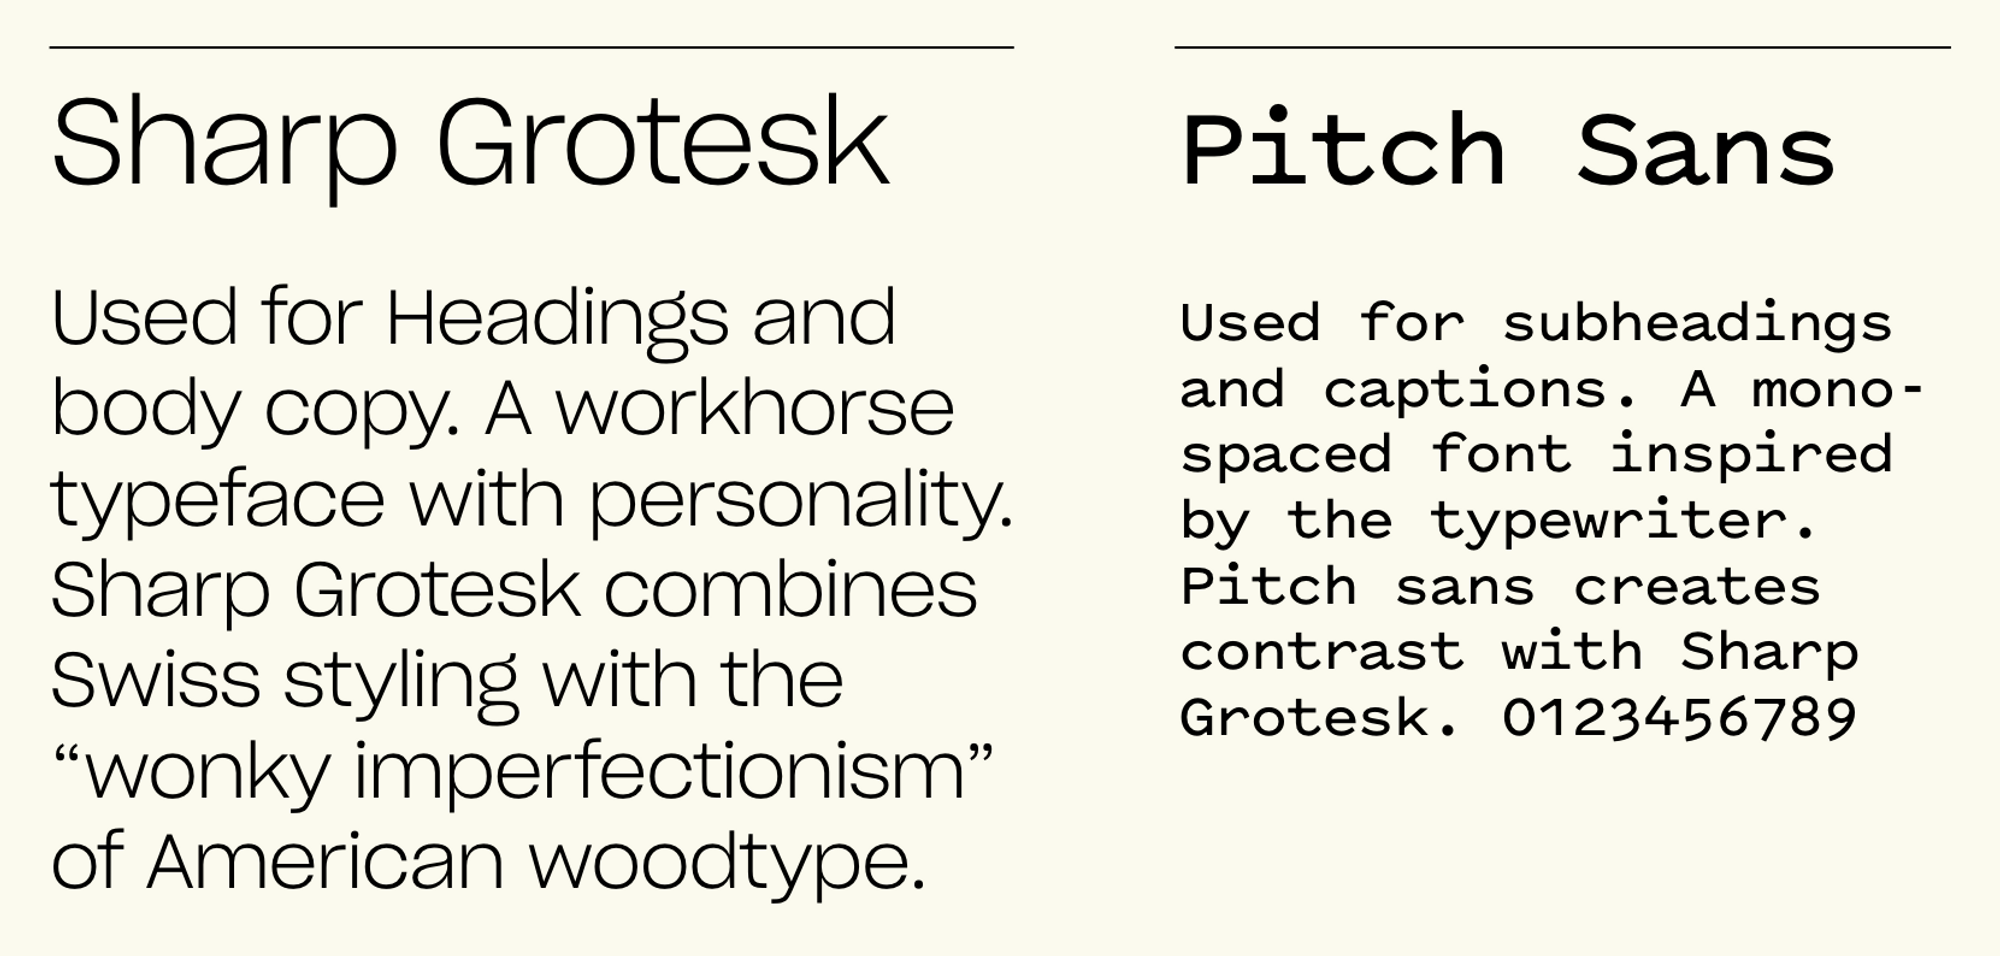 Introducing Starshipit brand fonts: Sharp Grotesk and Pitch Sans